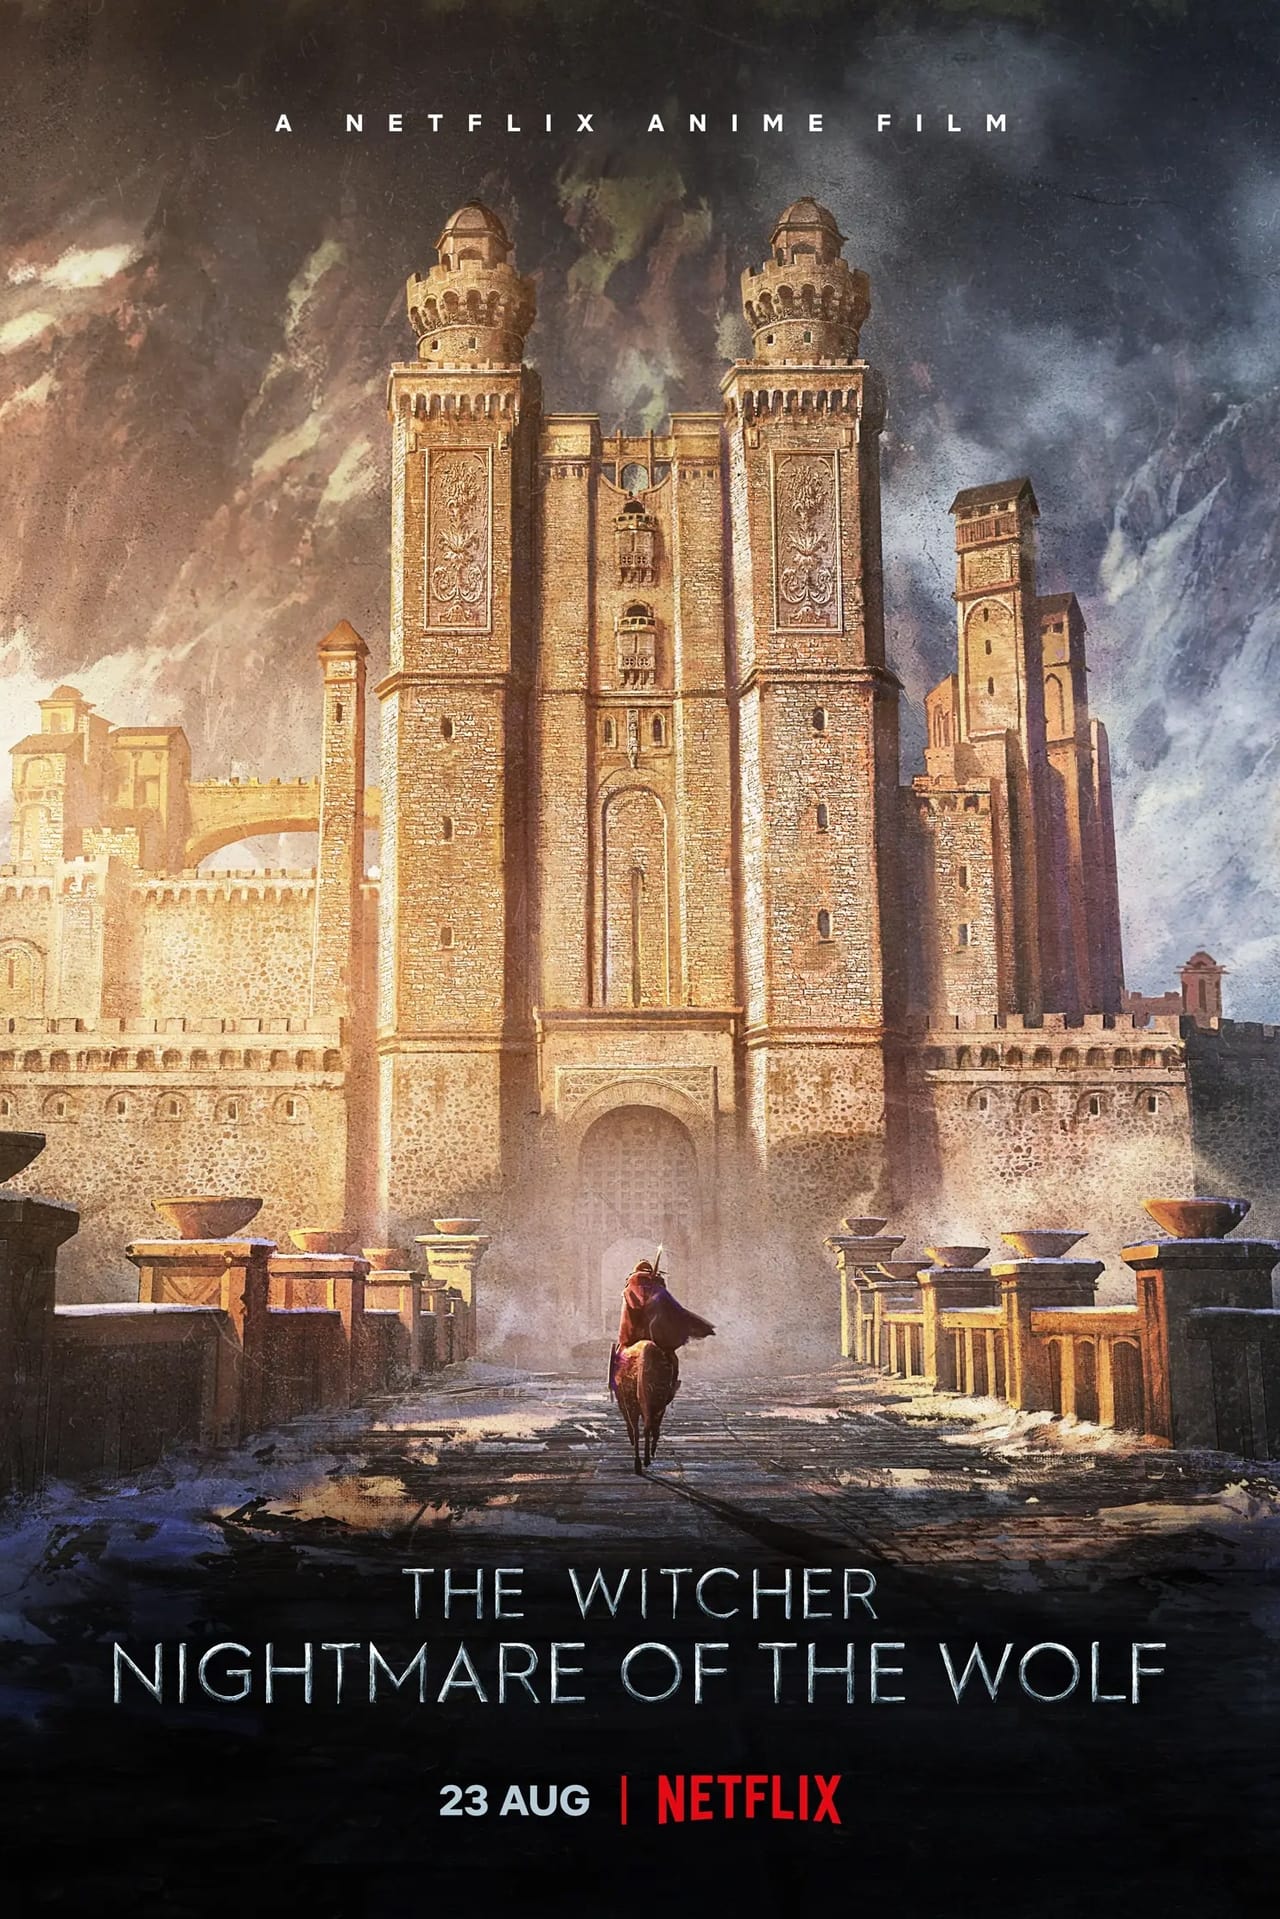 Escaping from poverty to become a witcher, Vesemir slays monsters for coin and glory, but when a new menace rises, he must face the demons of his past.